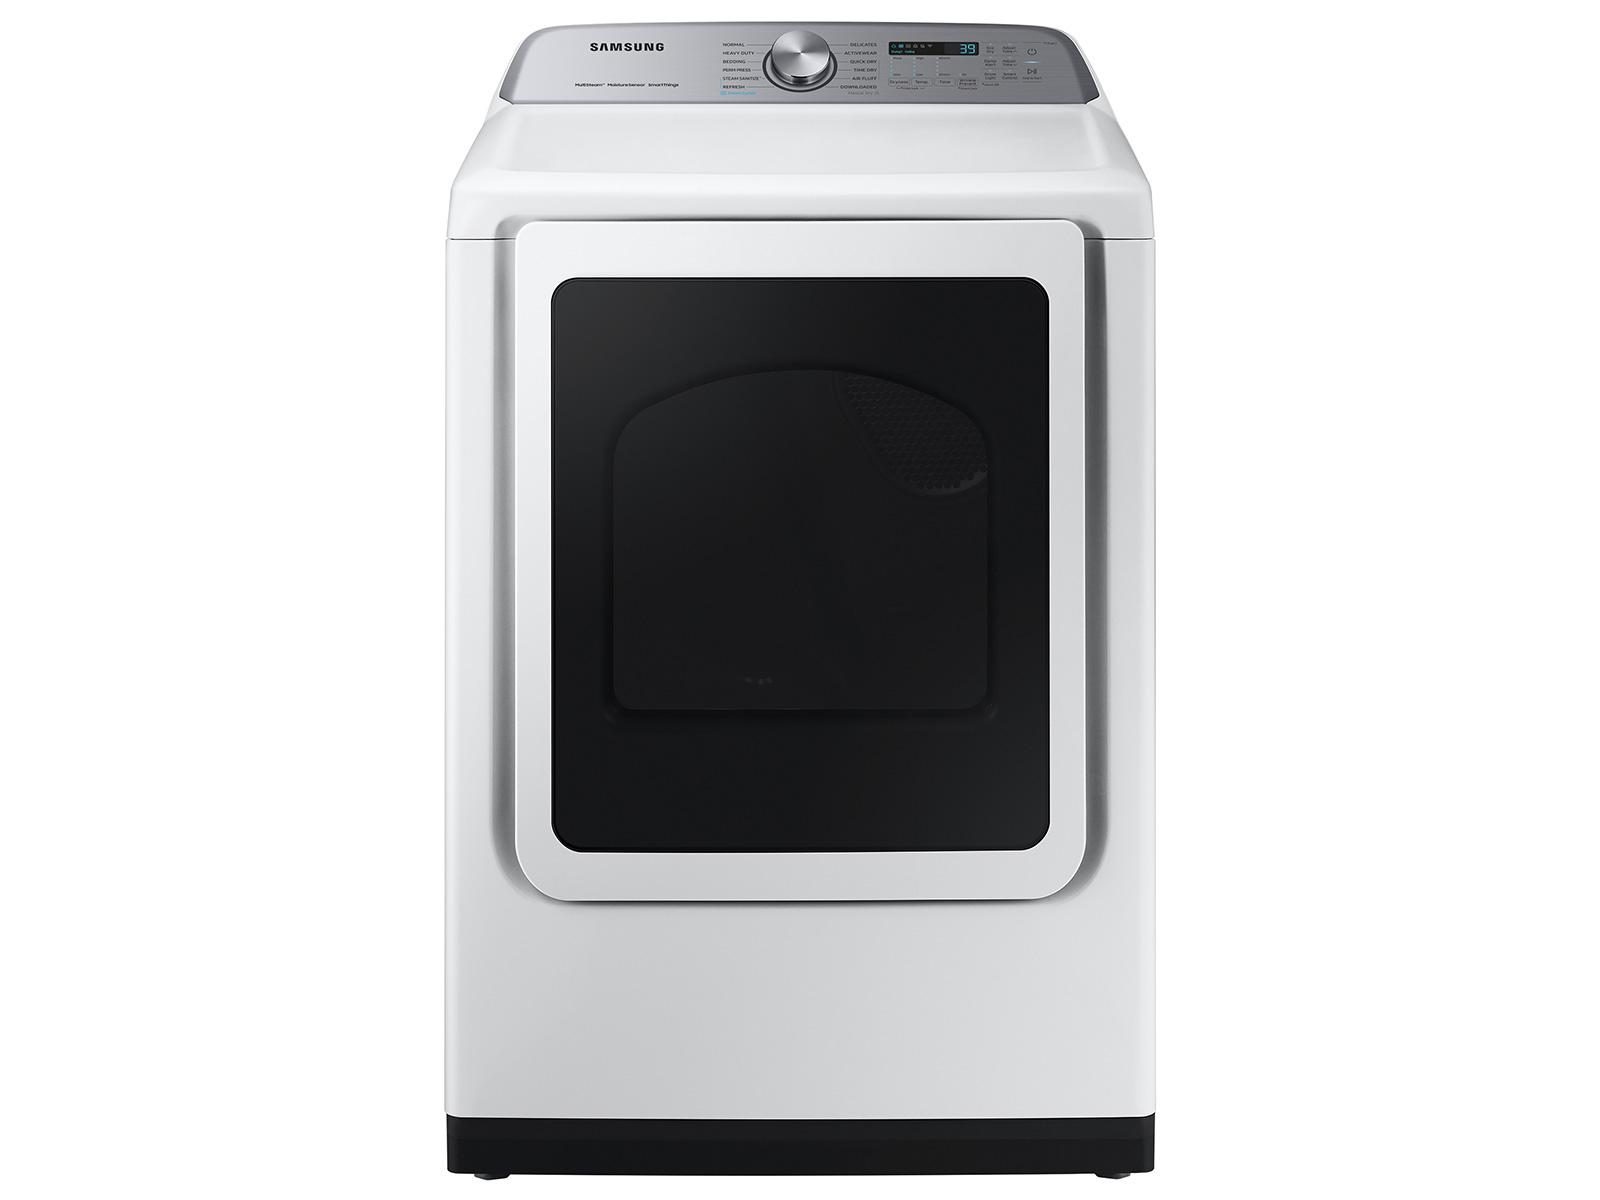 Photos - Tumble Dryer Samsung 7.4 cu. ft. Smart Gas Dryer with Steam Sanitize+ in White(DVG52A55 